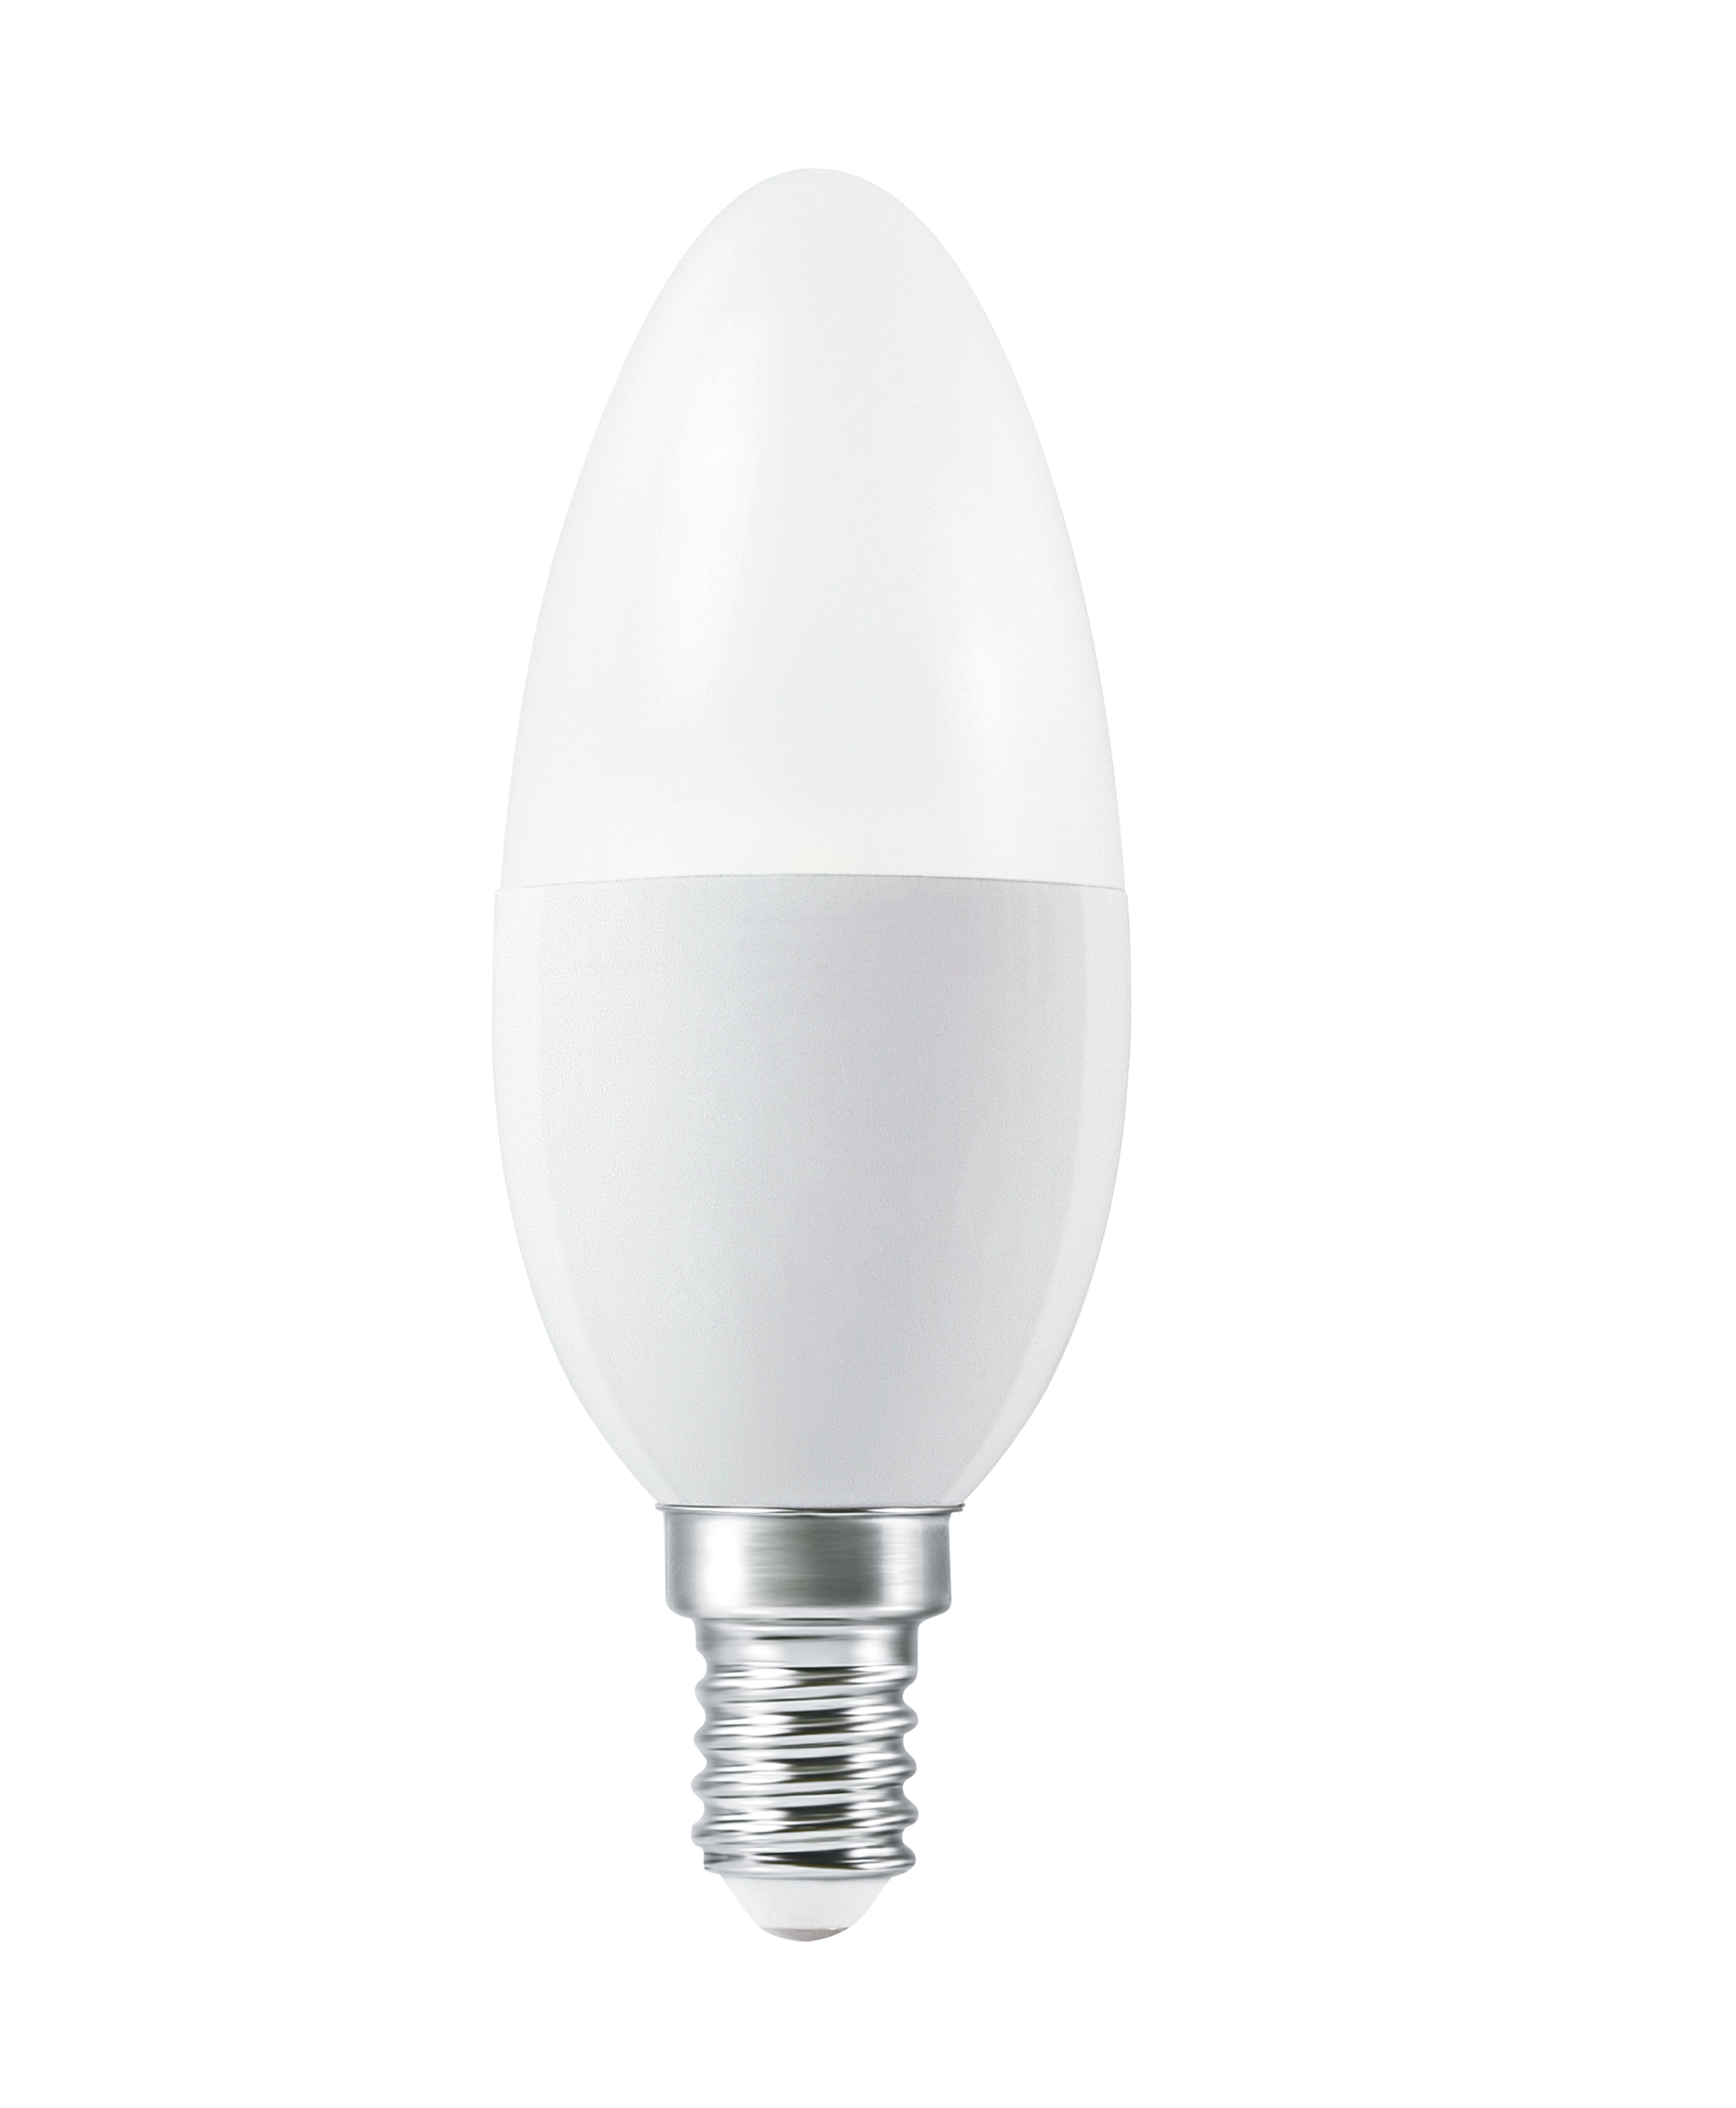 Dimmable LED Warmweiß Lampe LEDVANCE SMART+ Candle